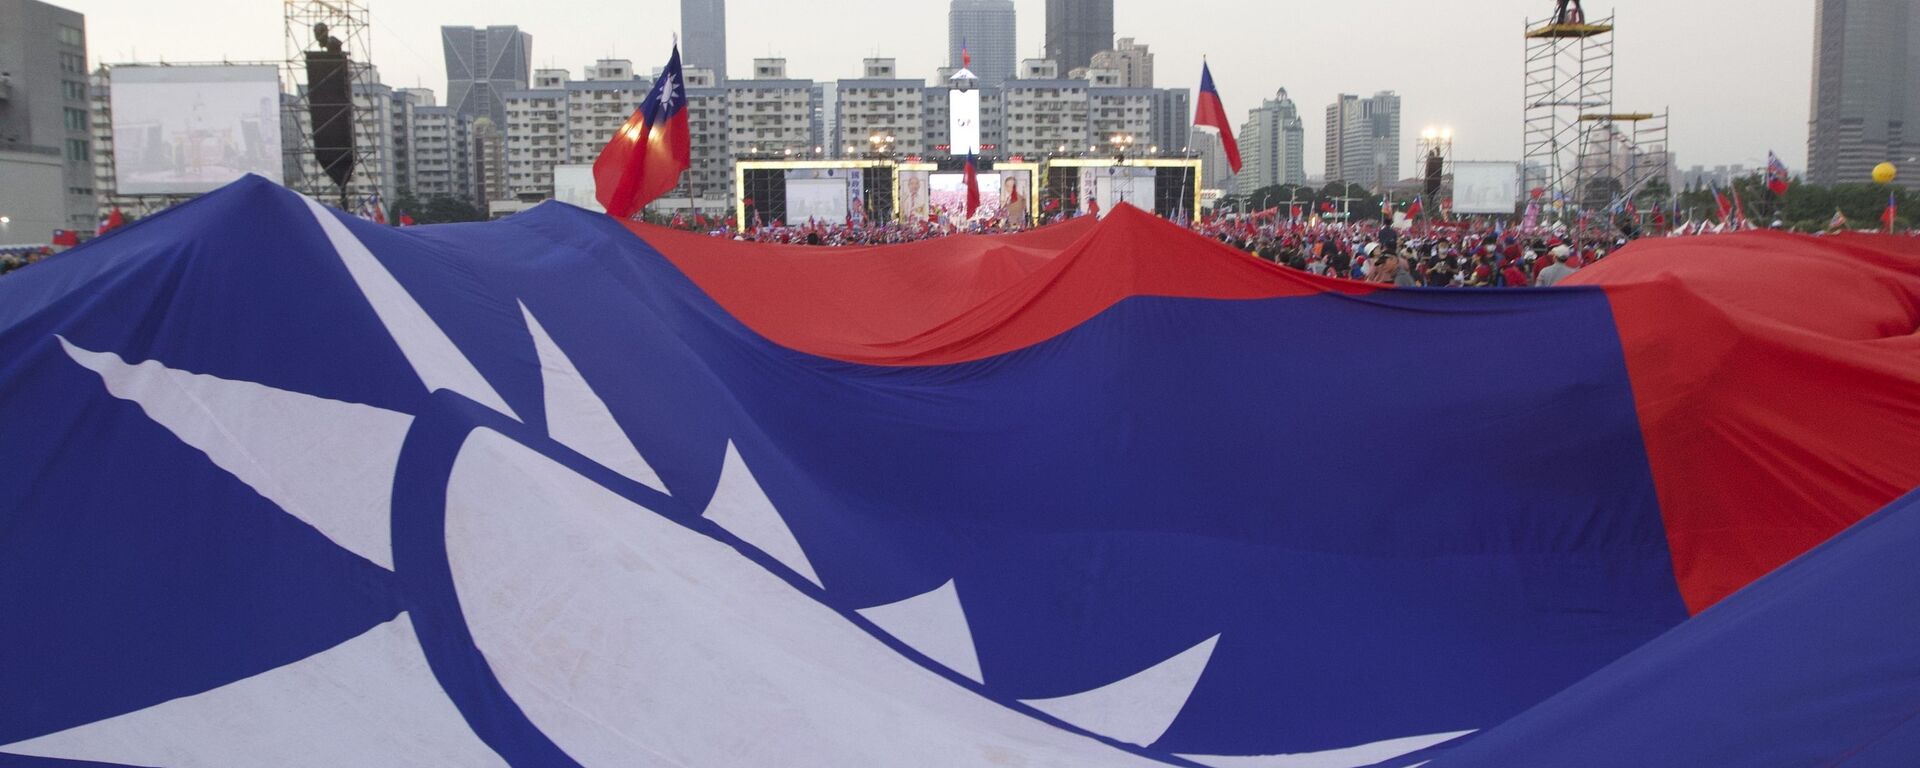 Supporters of Taiwan's 2020 presidential election candidate for the KMT, or Nationalist Party, Han Kuo-yu pass along a giant Taiwanese flag for the start of a campaign rally in southern Taiwan's Kaohsiung city on Friday, Jan 10, 2020 - Sputnik International, 1920, 13.09.2021